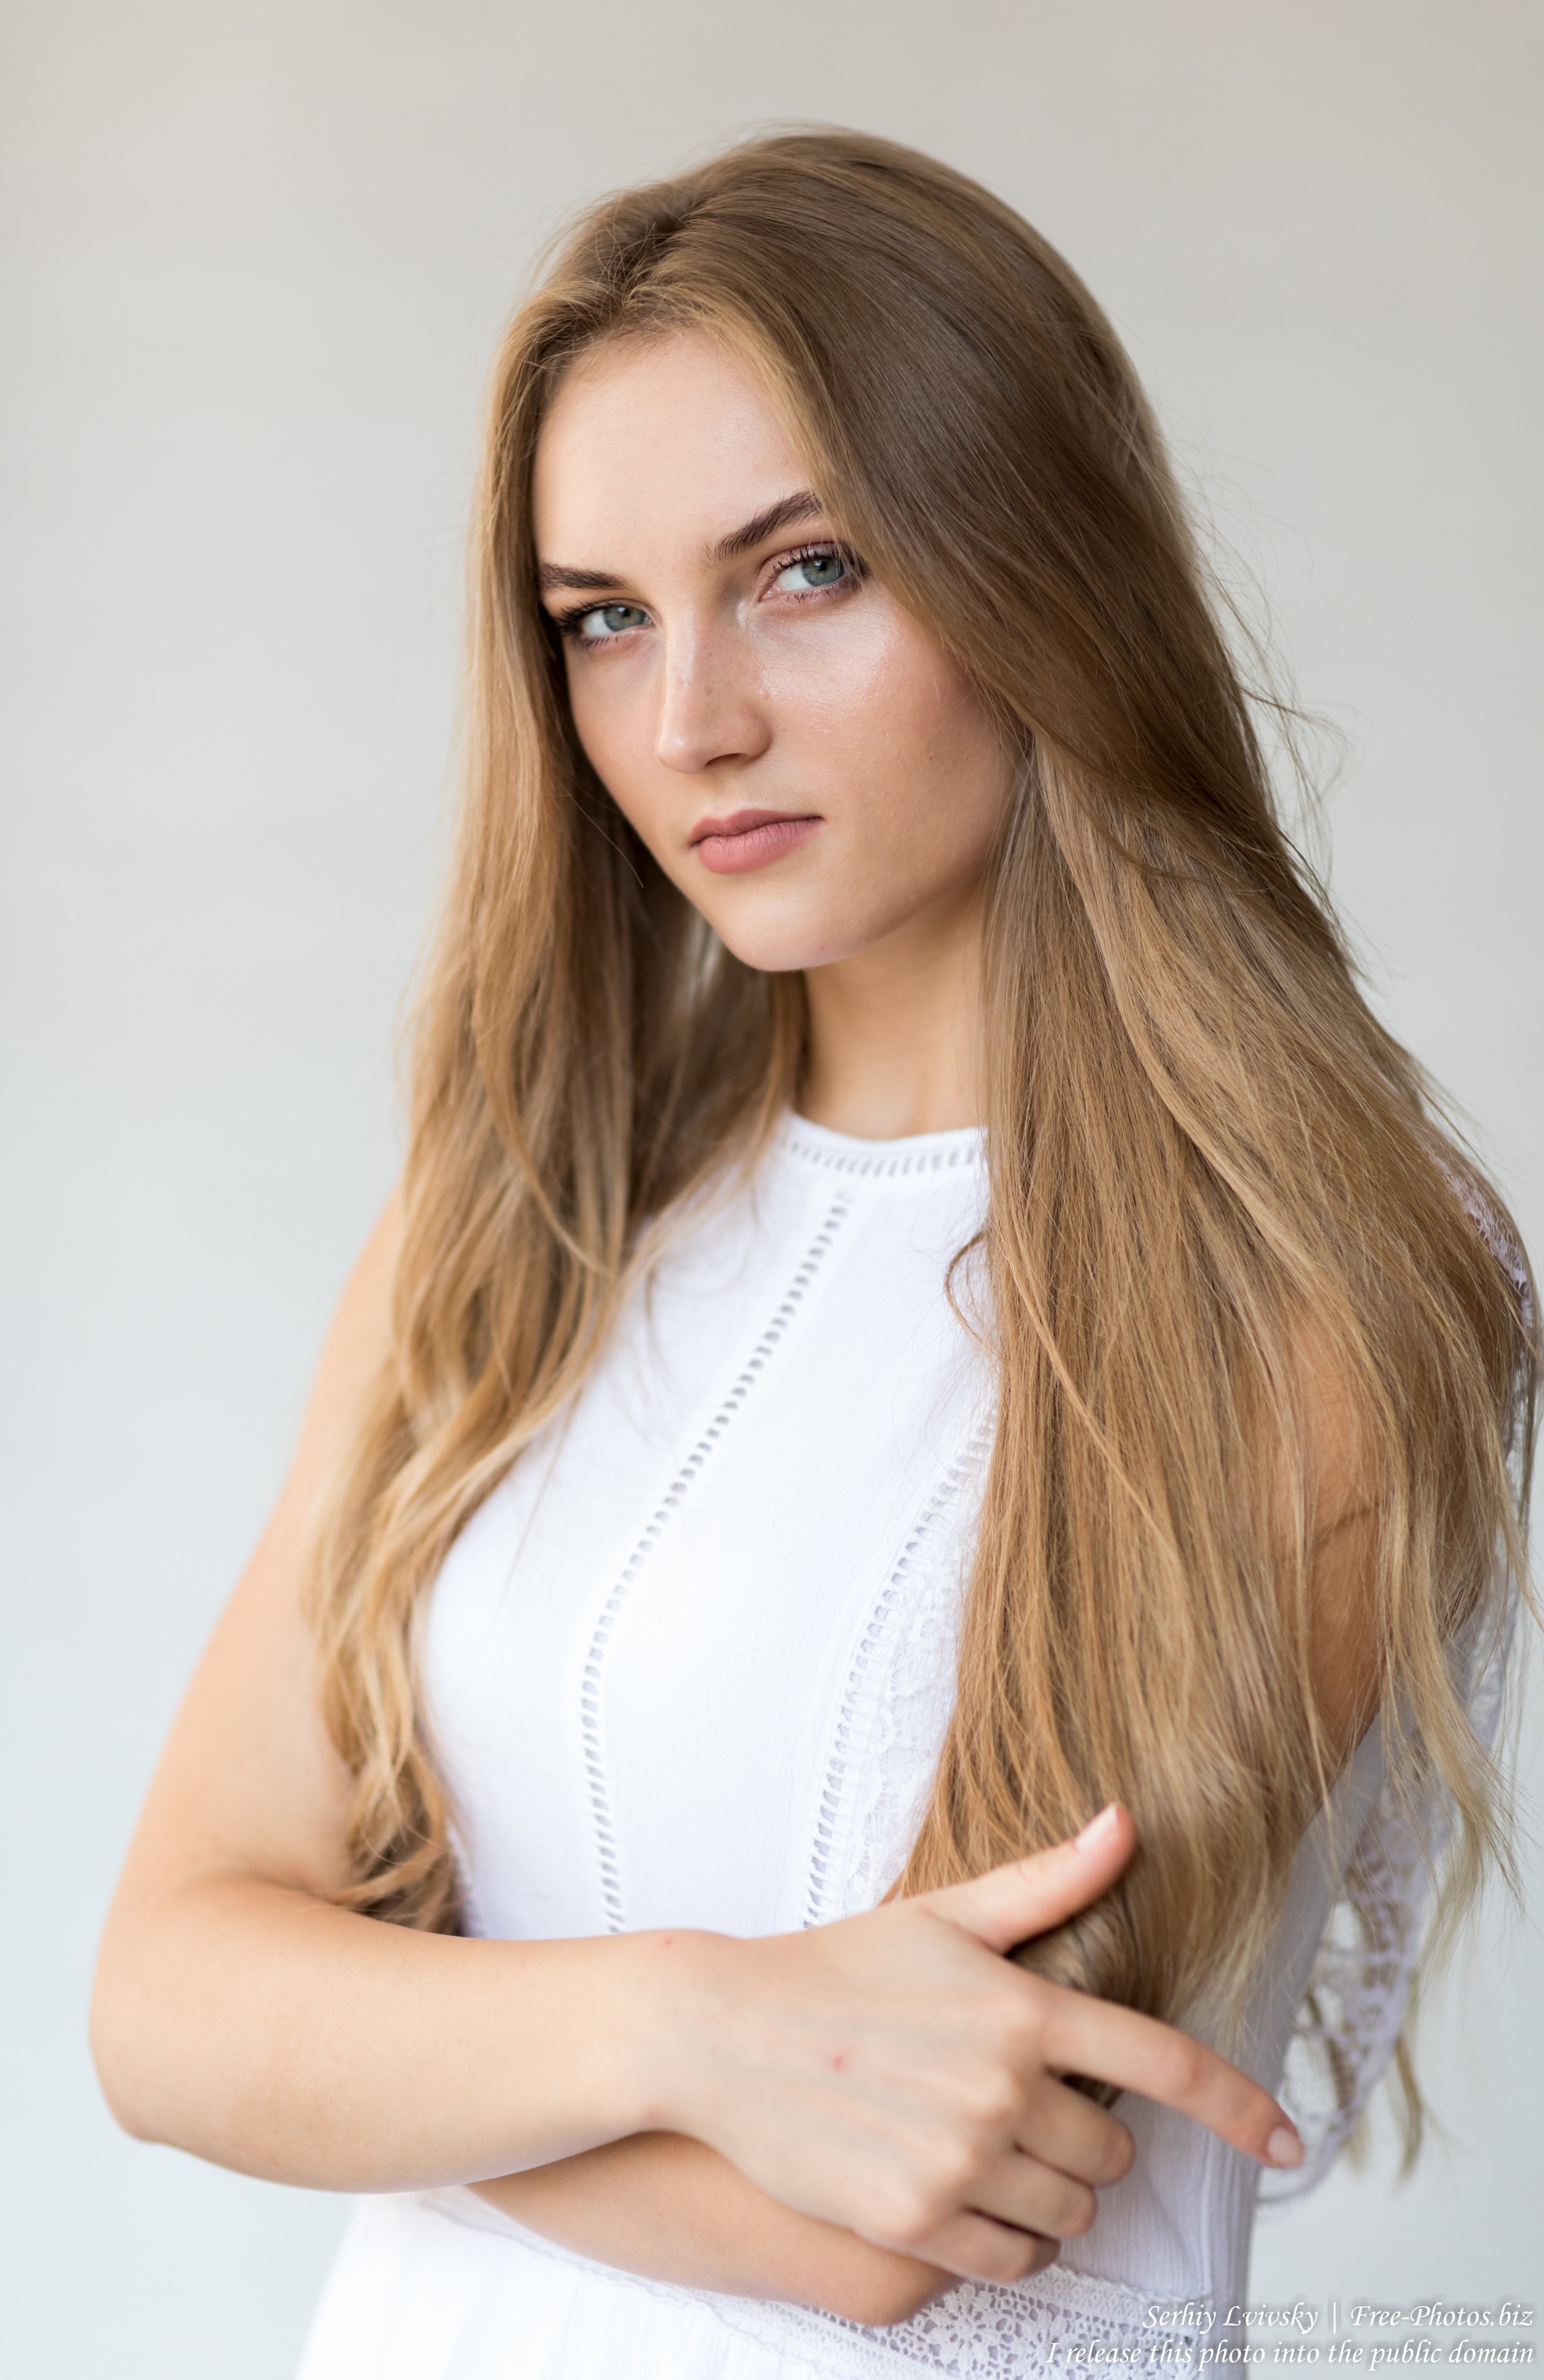 Photo Of Yaryna A 21 Year Old Natural Blonde Catholic Girl Photographed In August 2019 By